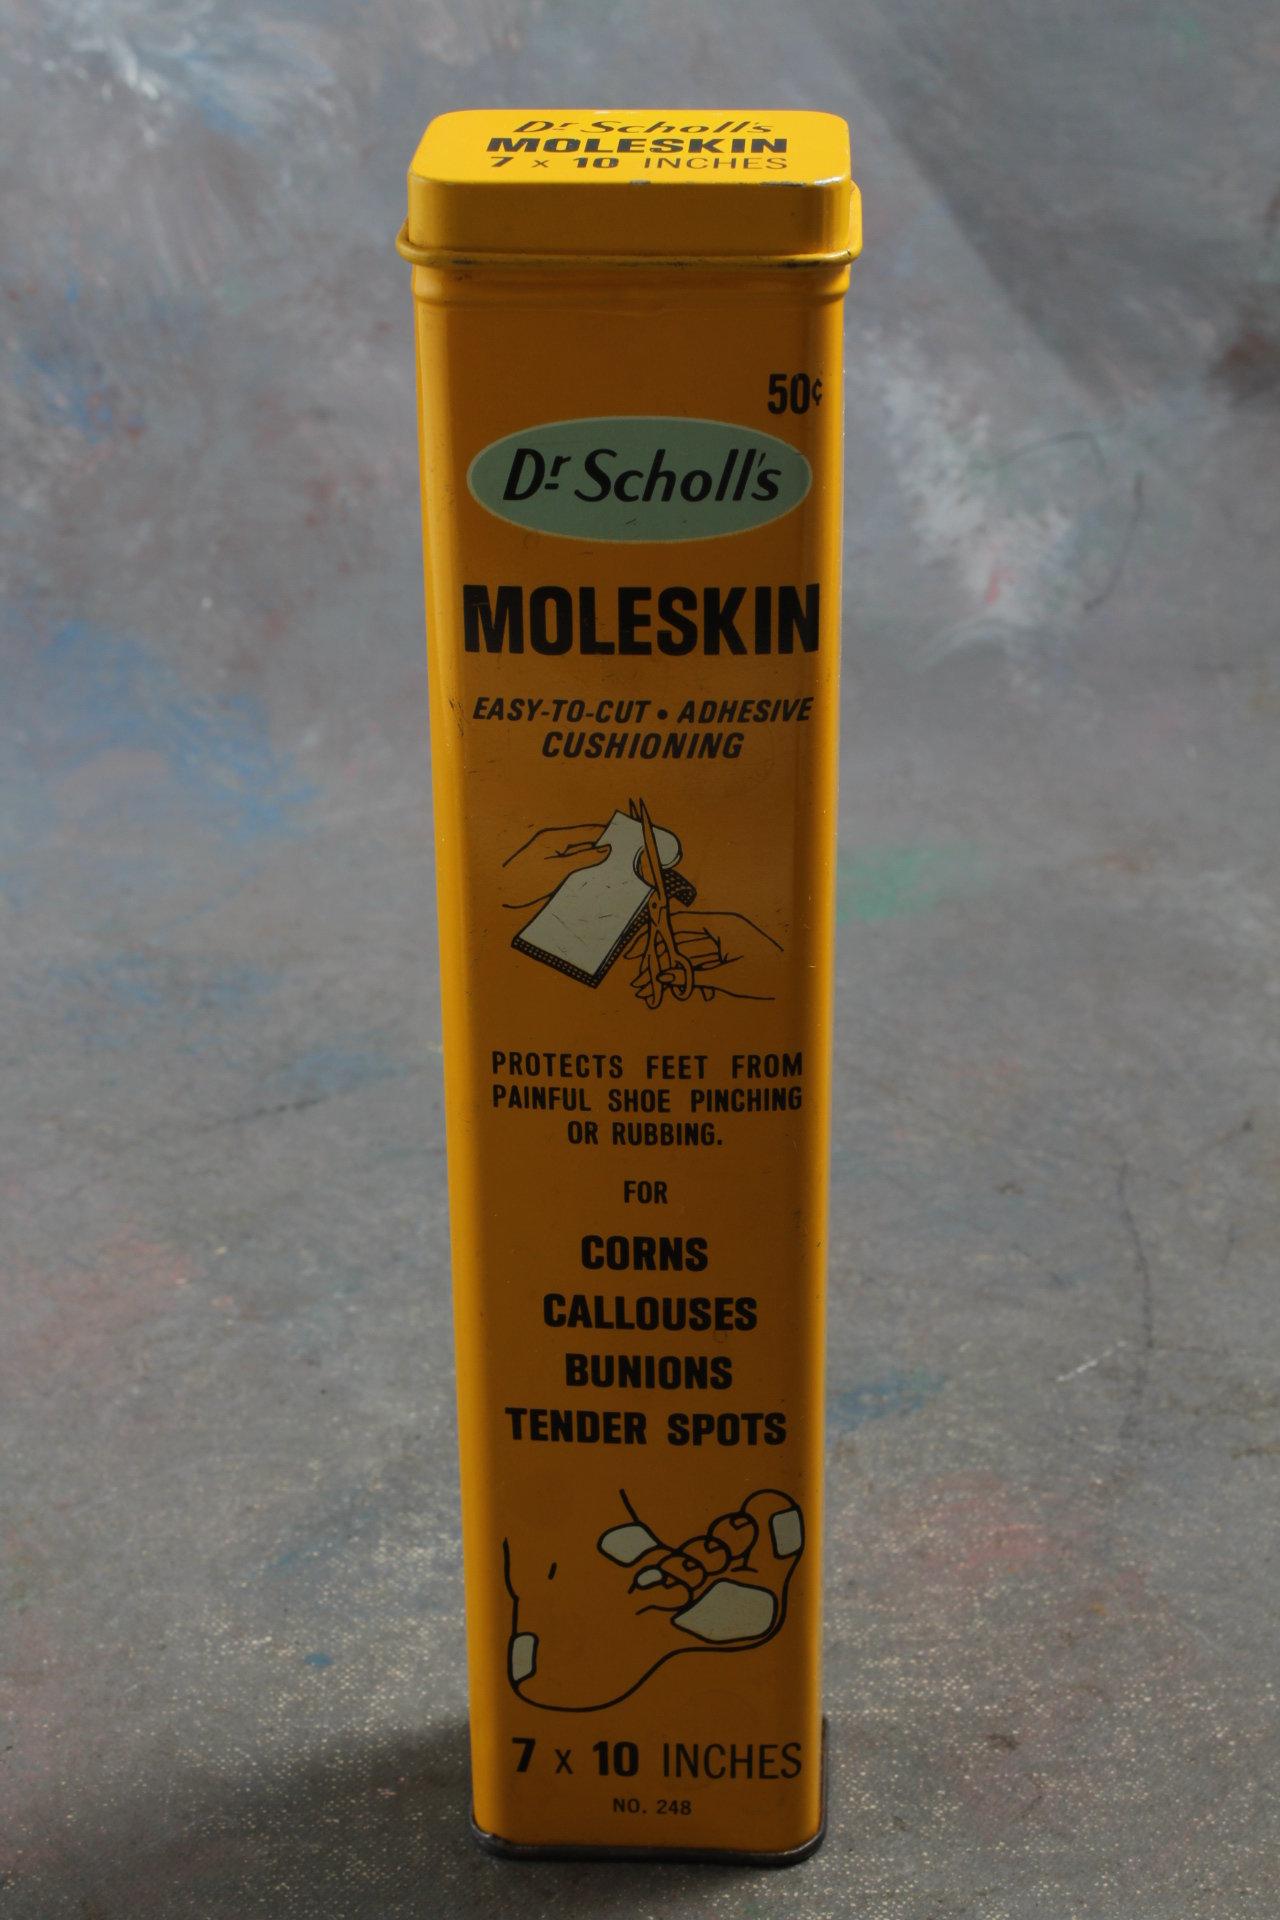 1968 Dr. Scholl's Moleskin Advertising Tin with Original Contents